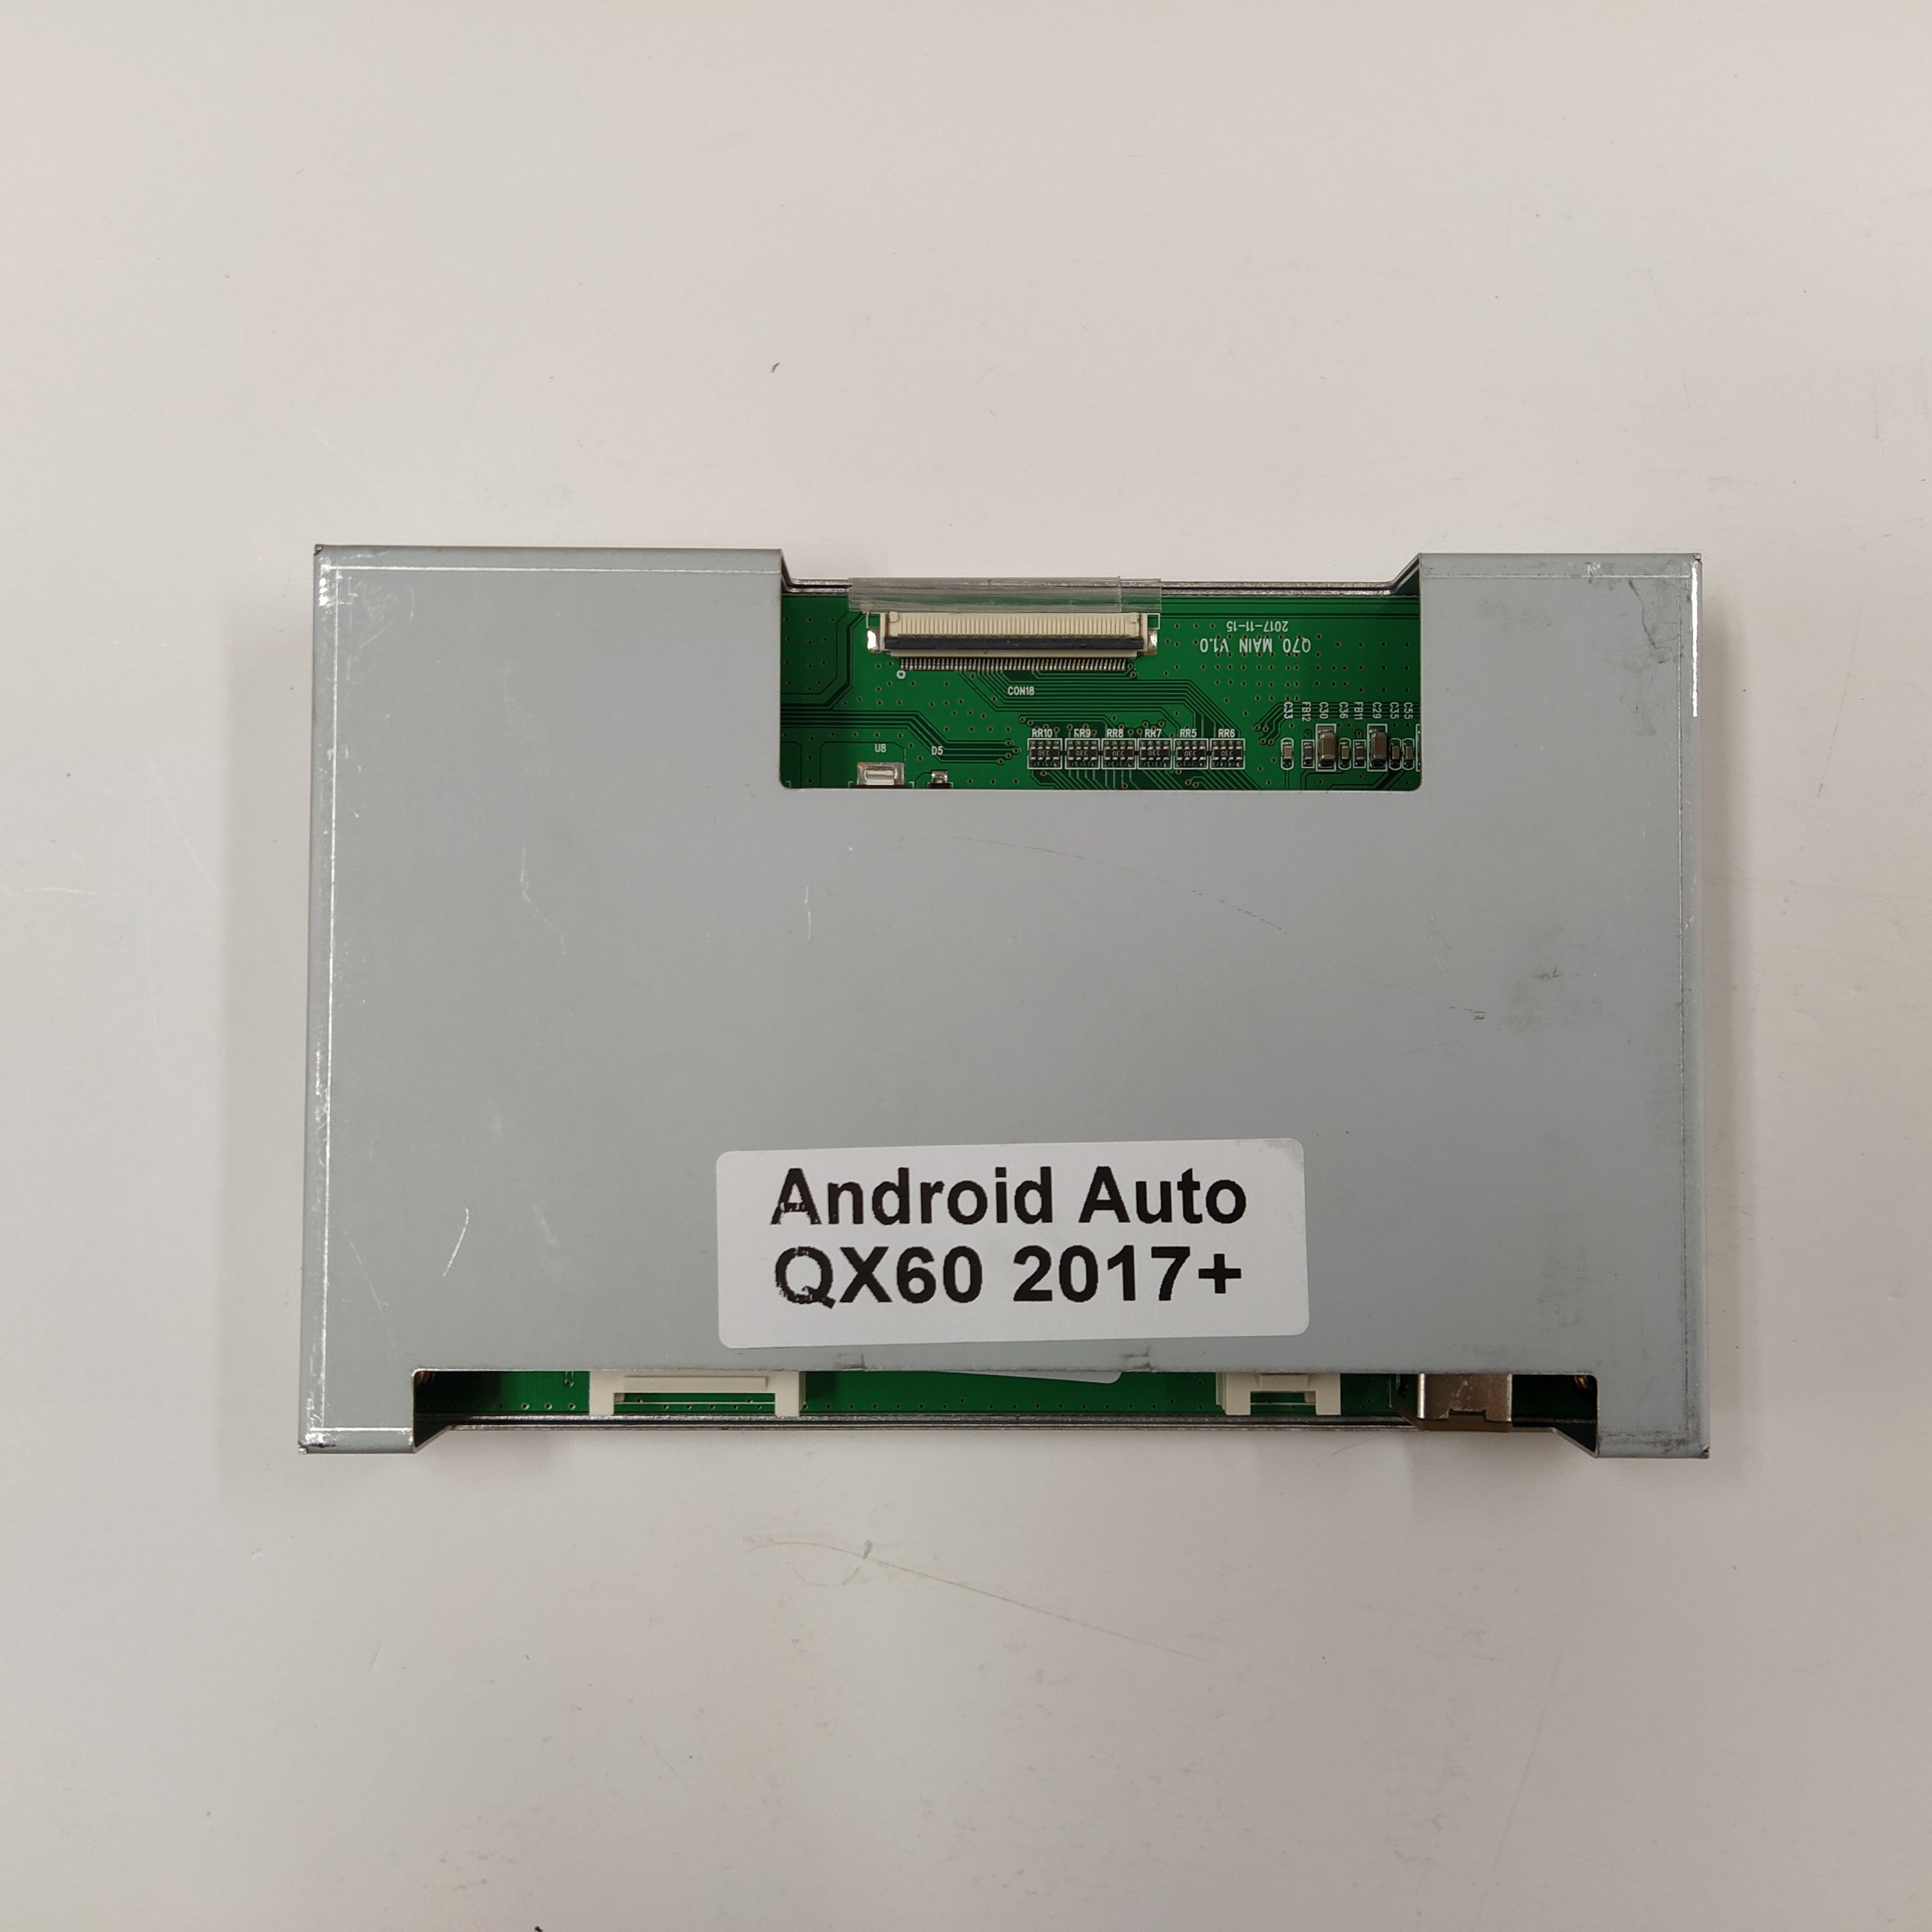 Presidents Day Sale : OEM Certified Wired & Wireless Nissan CarPlay for  Armada 2017-2020 Android Auto upgrade module – UNAVI USA, Inc.